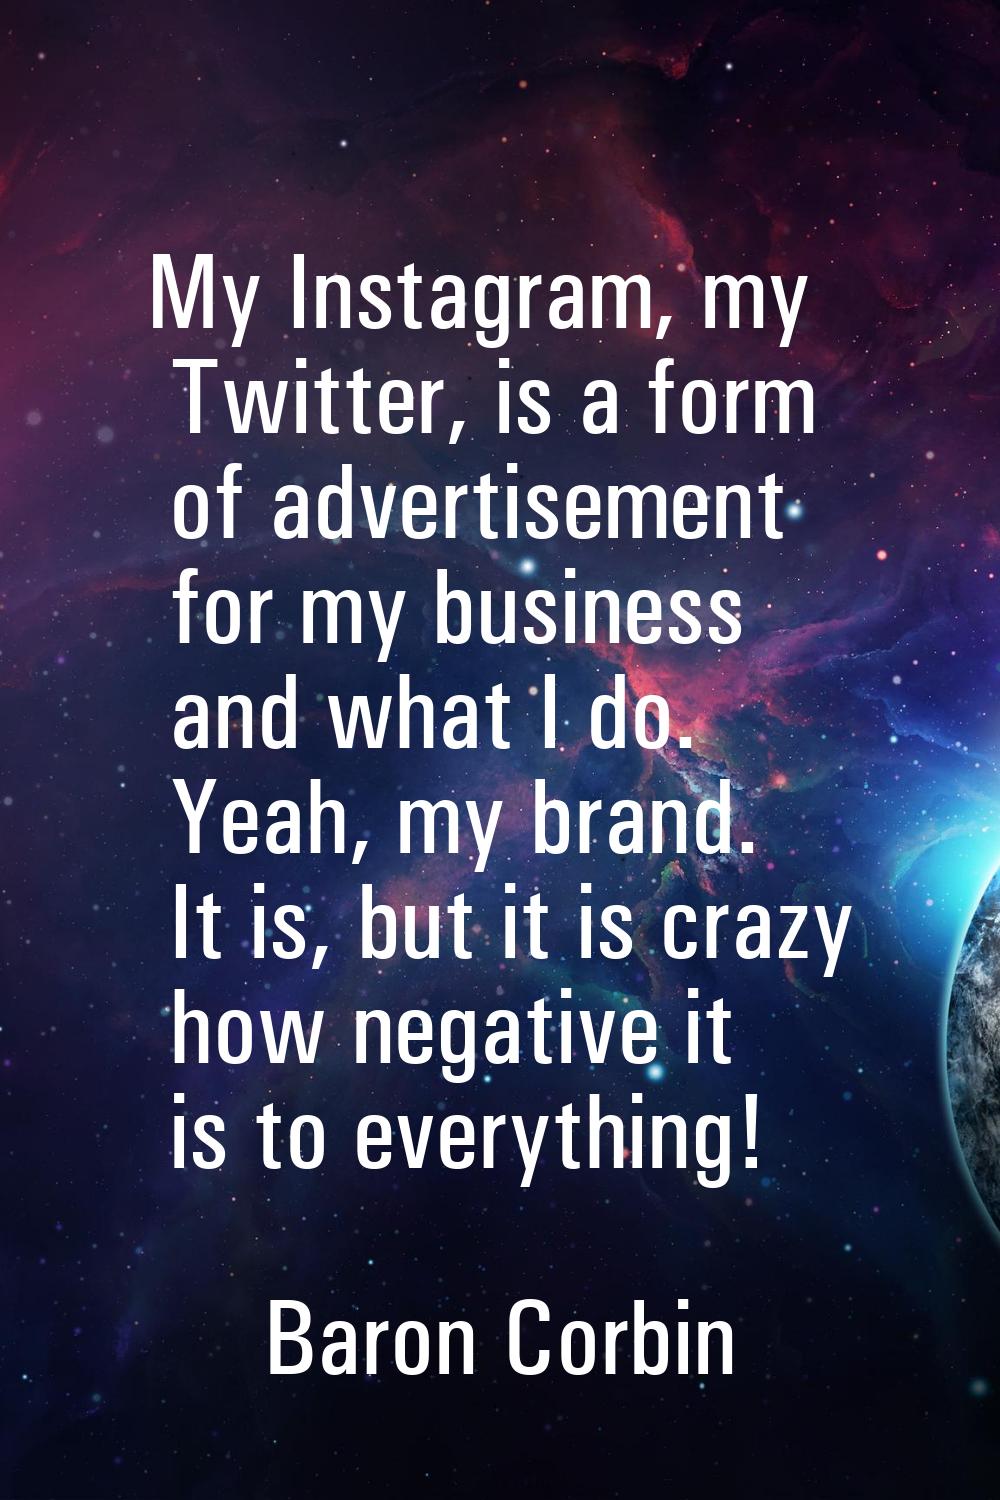 My Instagram, my Twitter, is a form of advertisement for my business and what I do. Yeah, my brand.